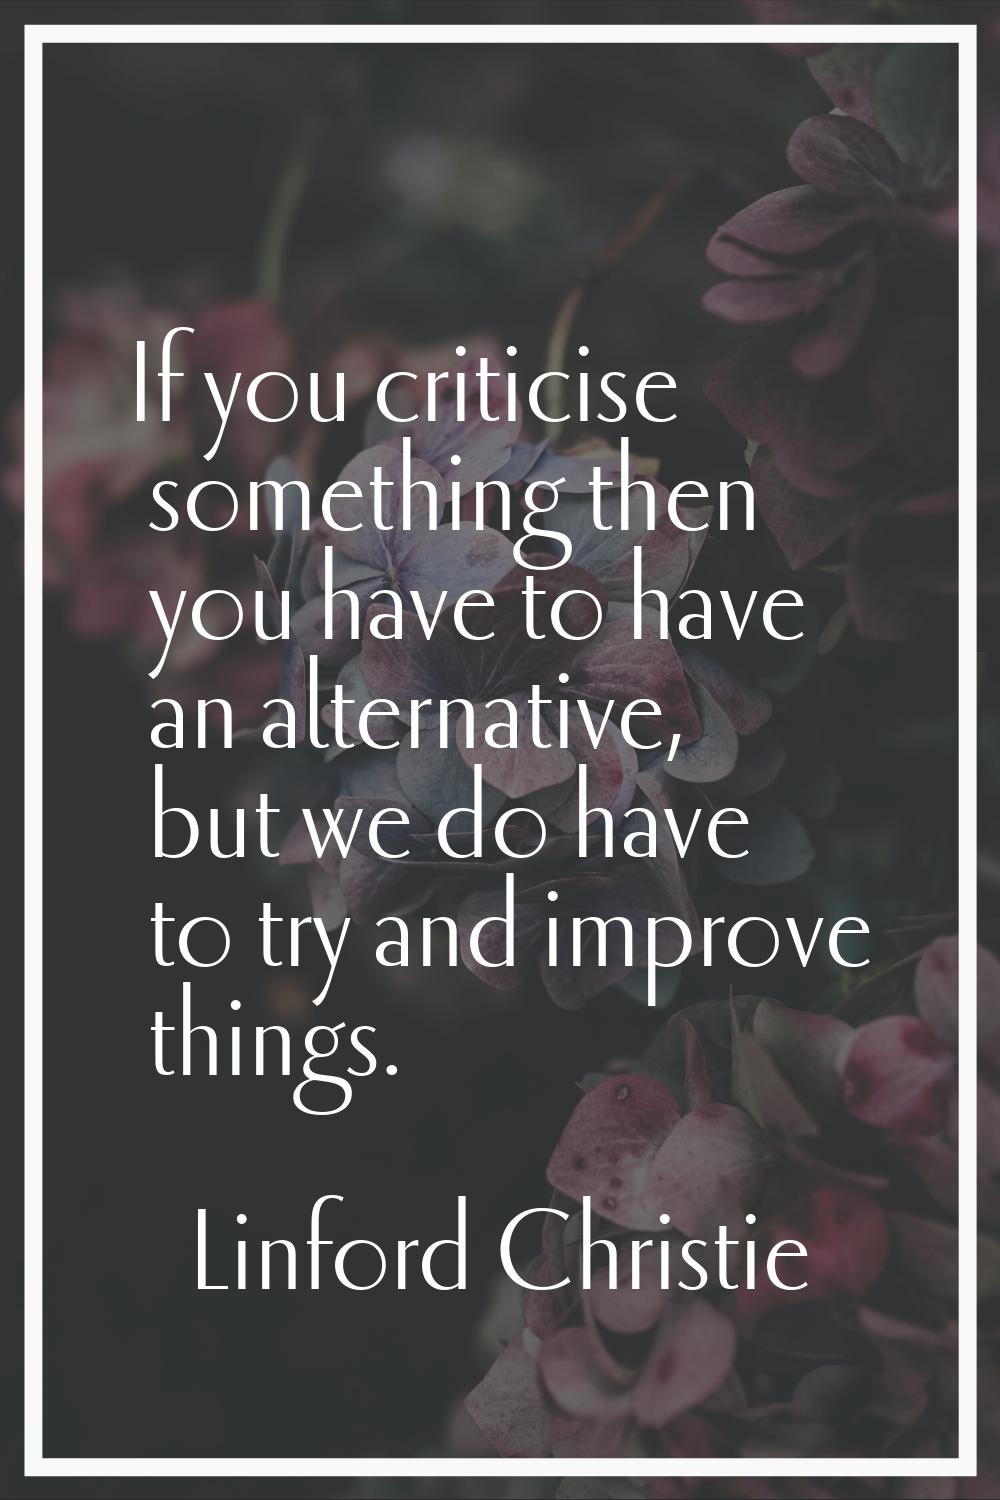 If you criticise something then you have to have an alternative, but we do have to try and improve 